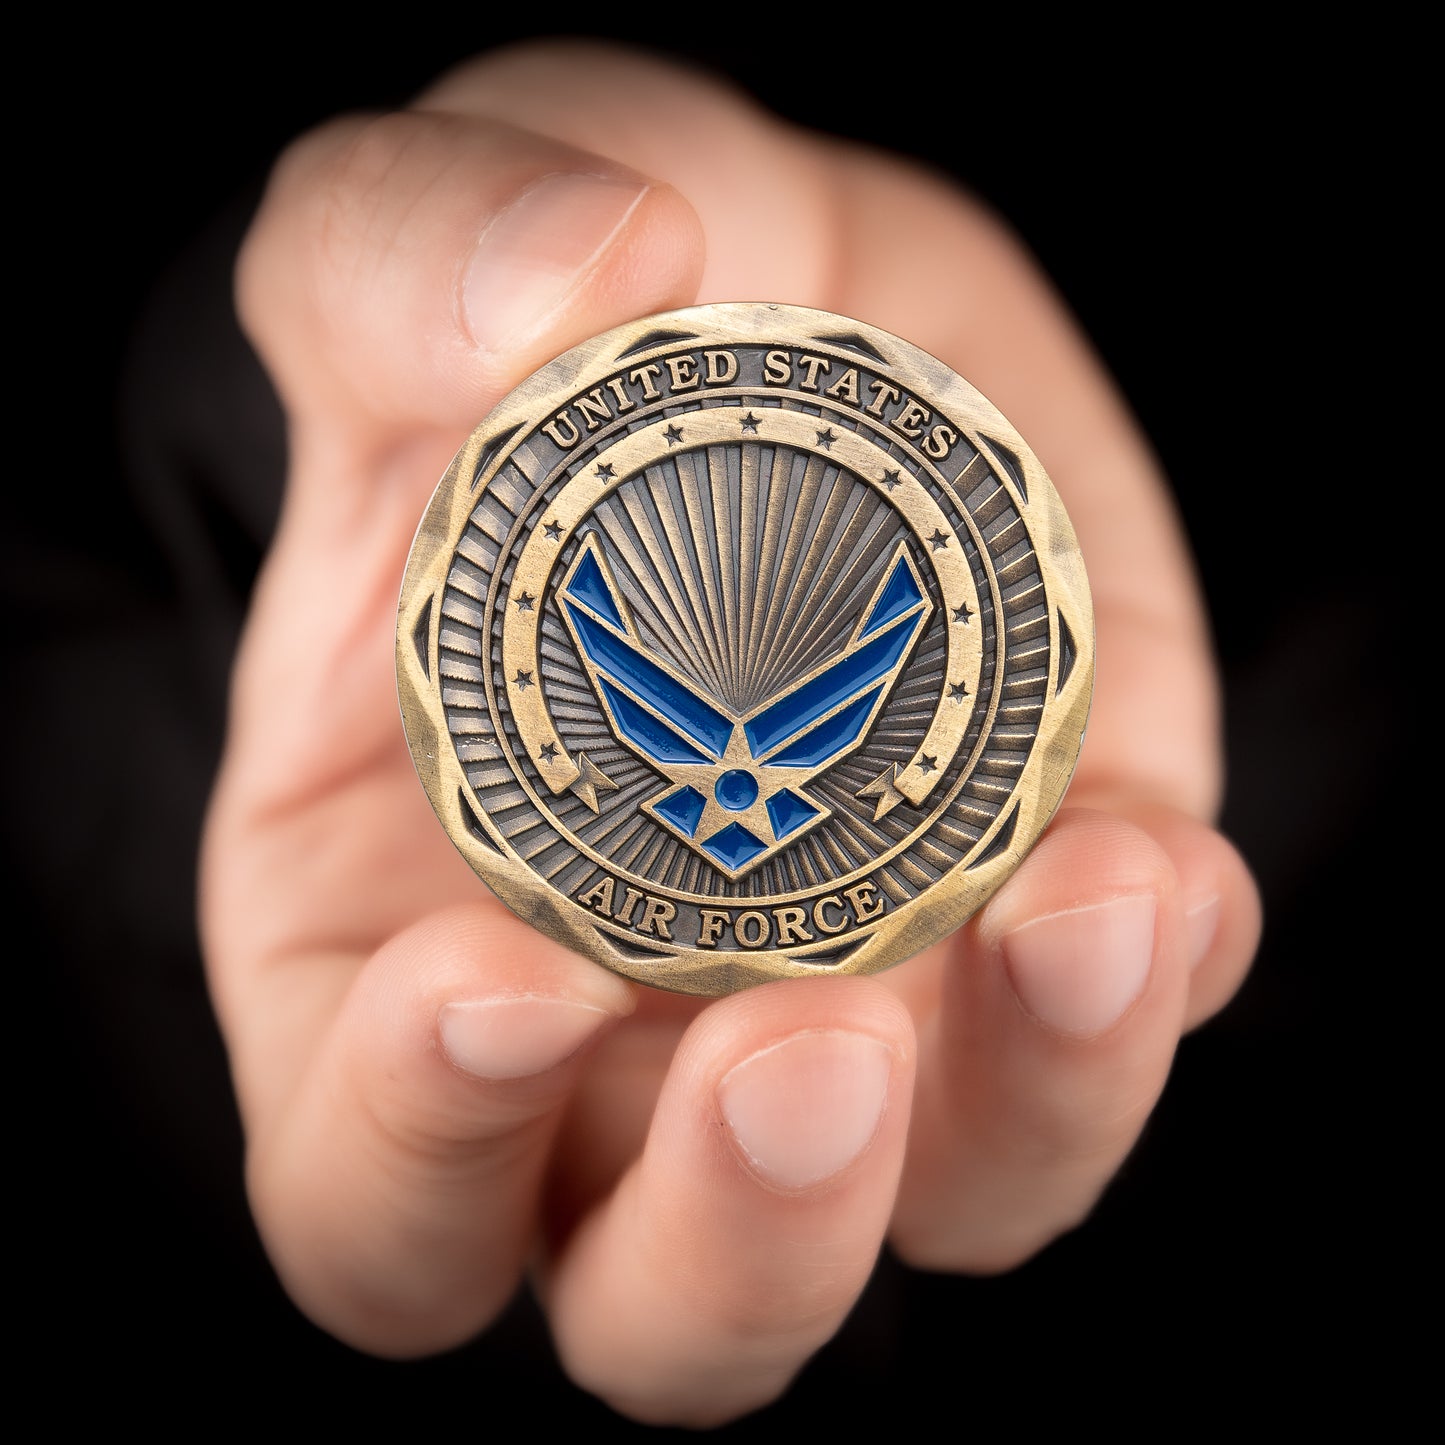 Air Force - Thank You For Your Service Coin